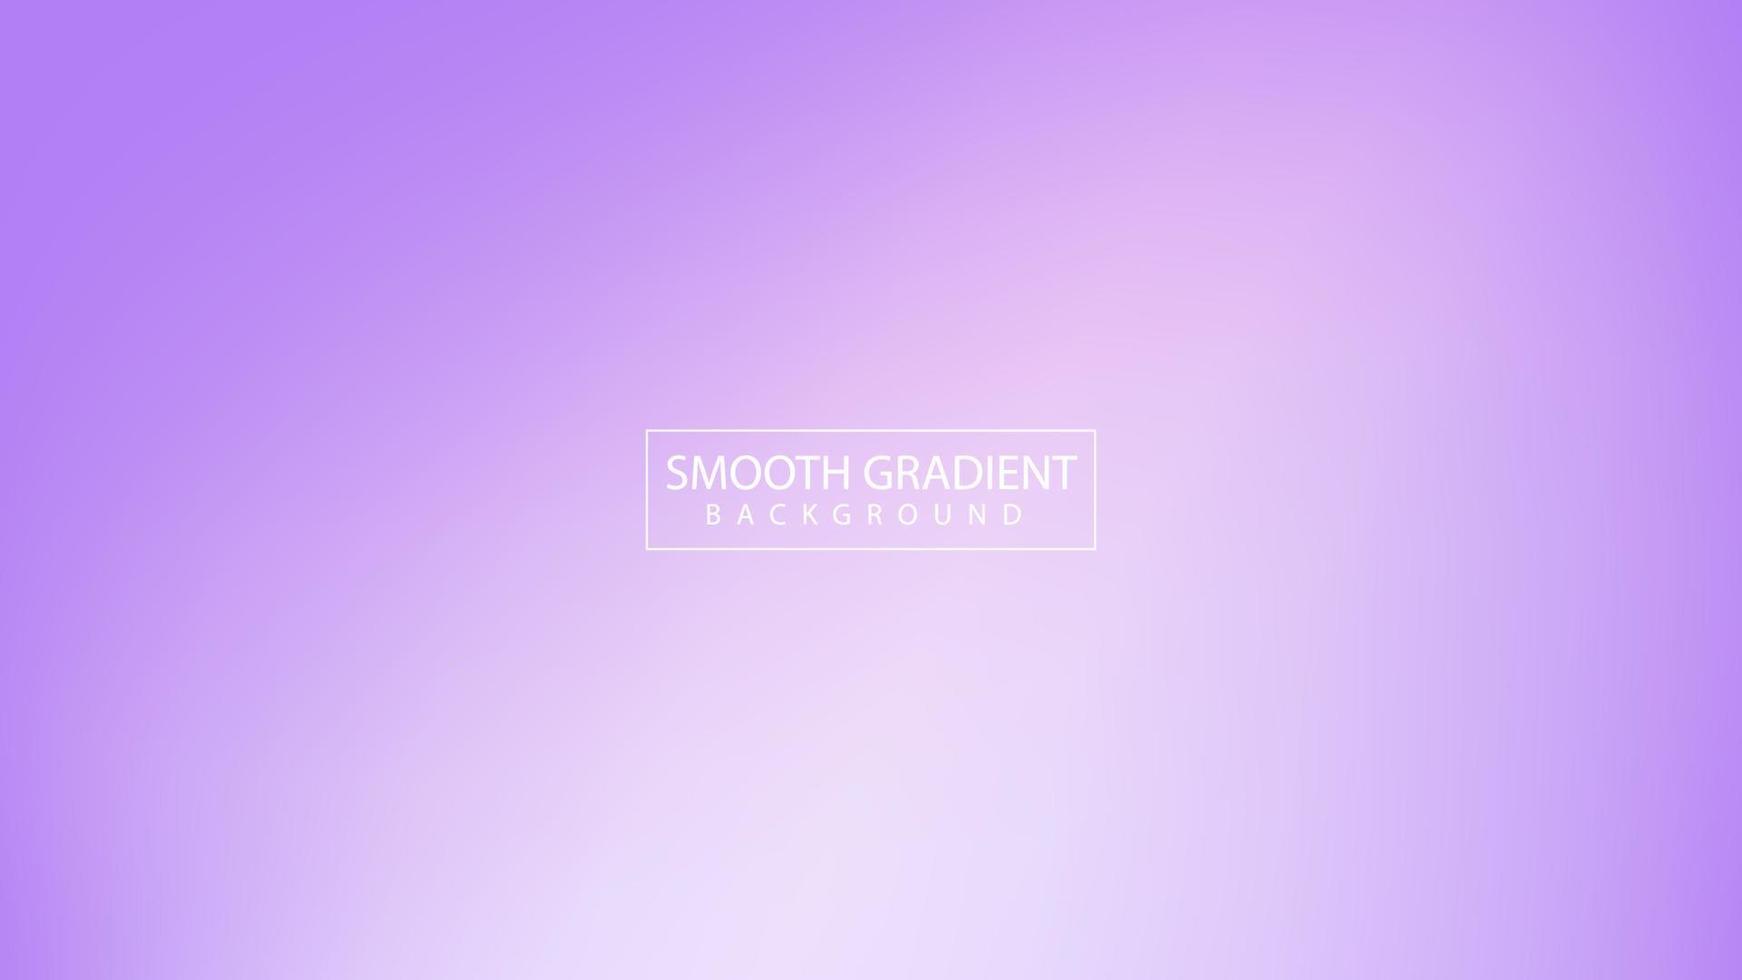 Smooth gradient background with soft colors vector